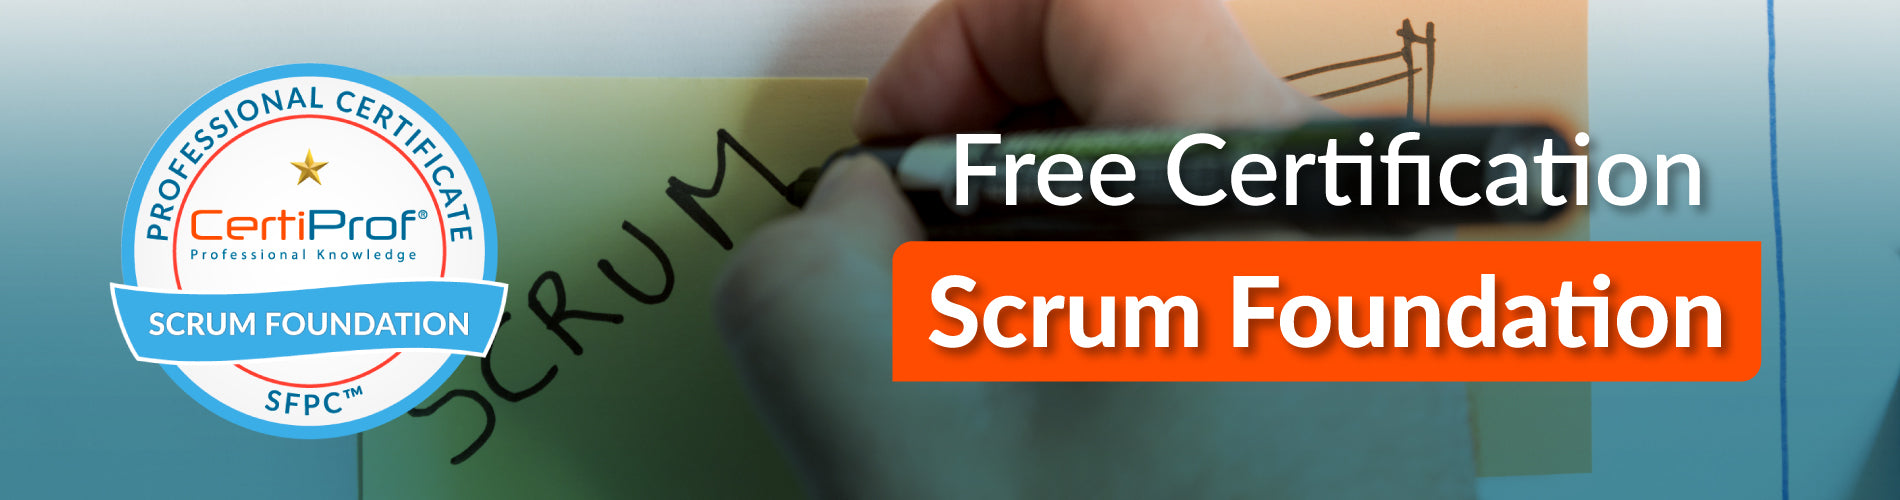 CertiProf launches no-cost Scrum Foundation Certification Exam for IT sector